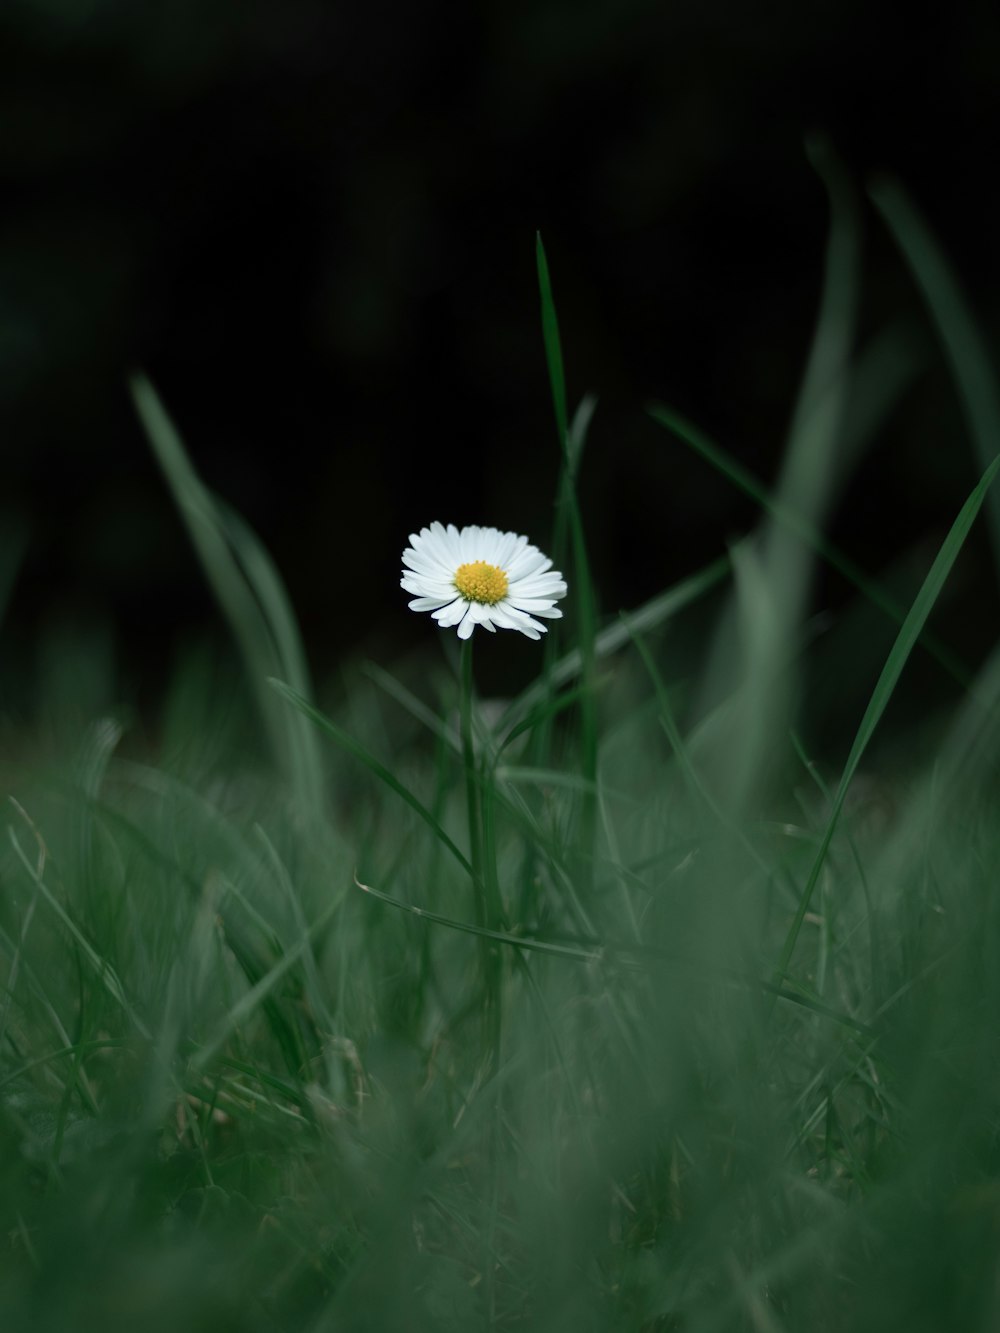 a single daisy sitting in the middle of a grassy field